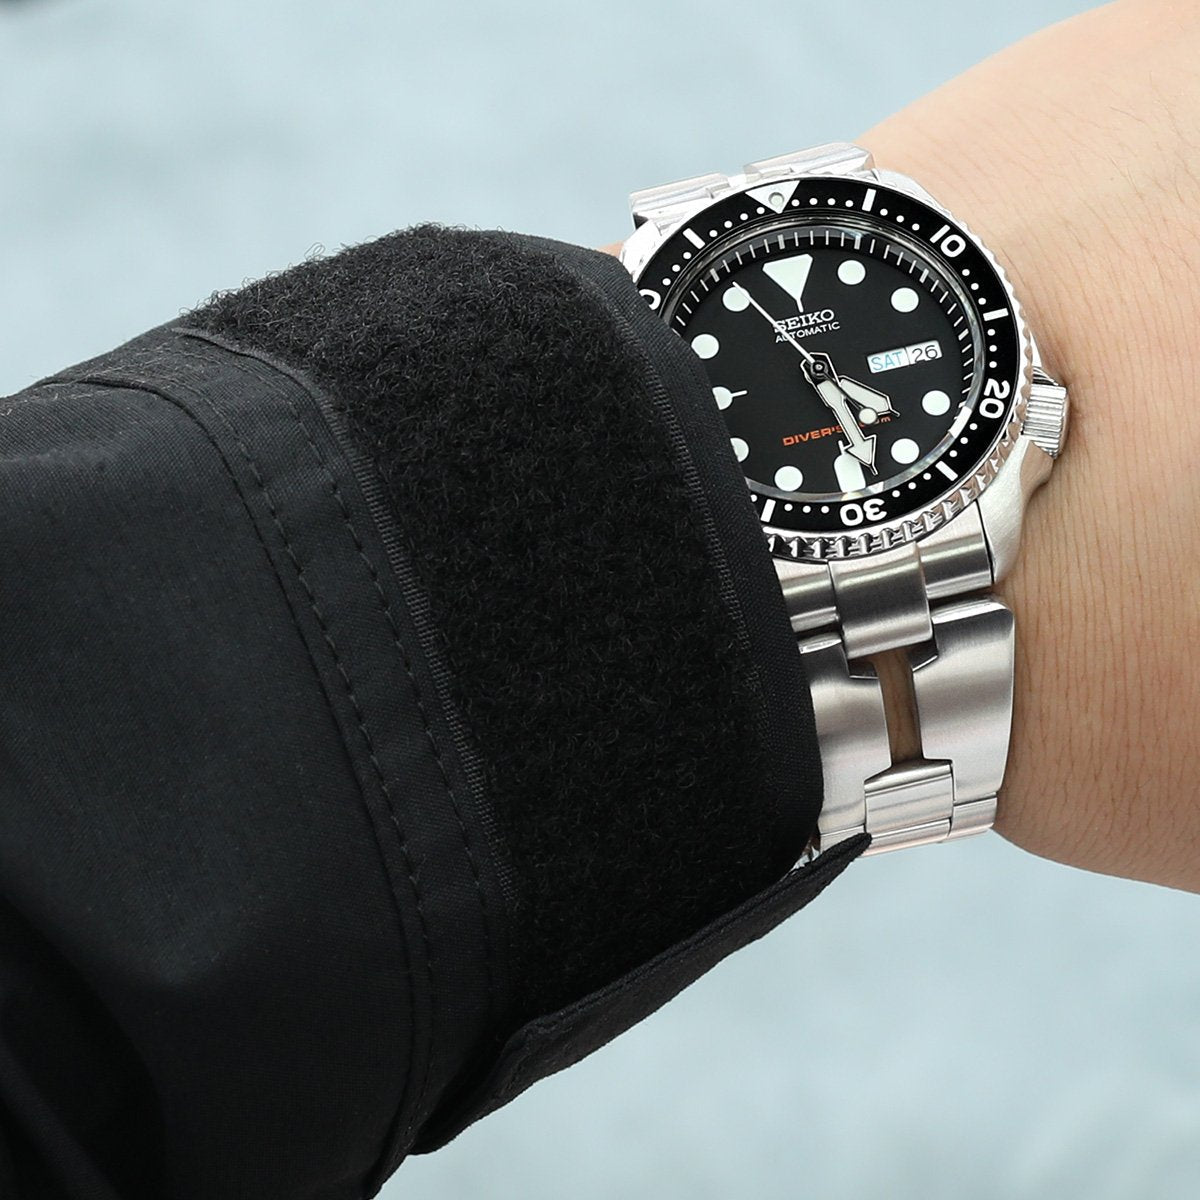 Seiko SKX007 watch band from Strapcode